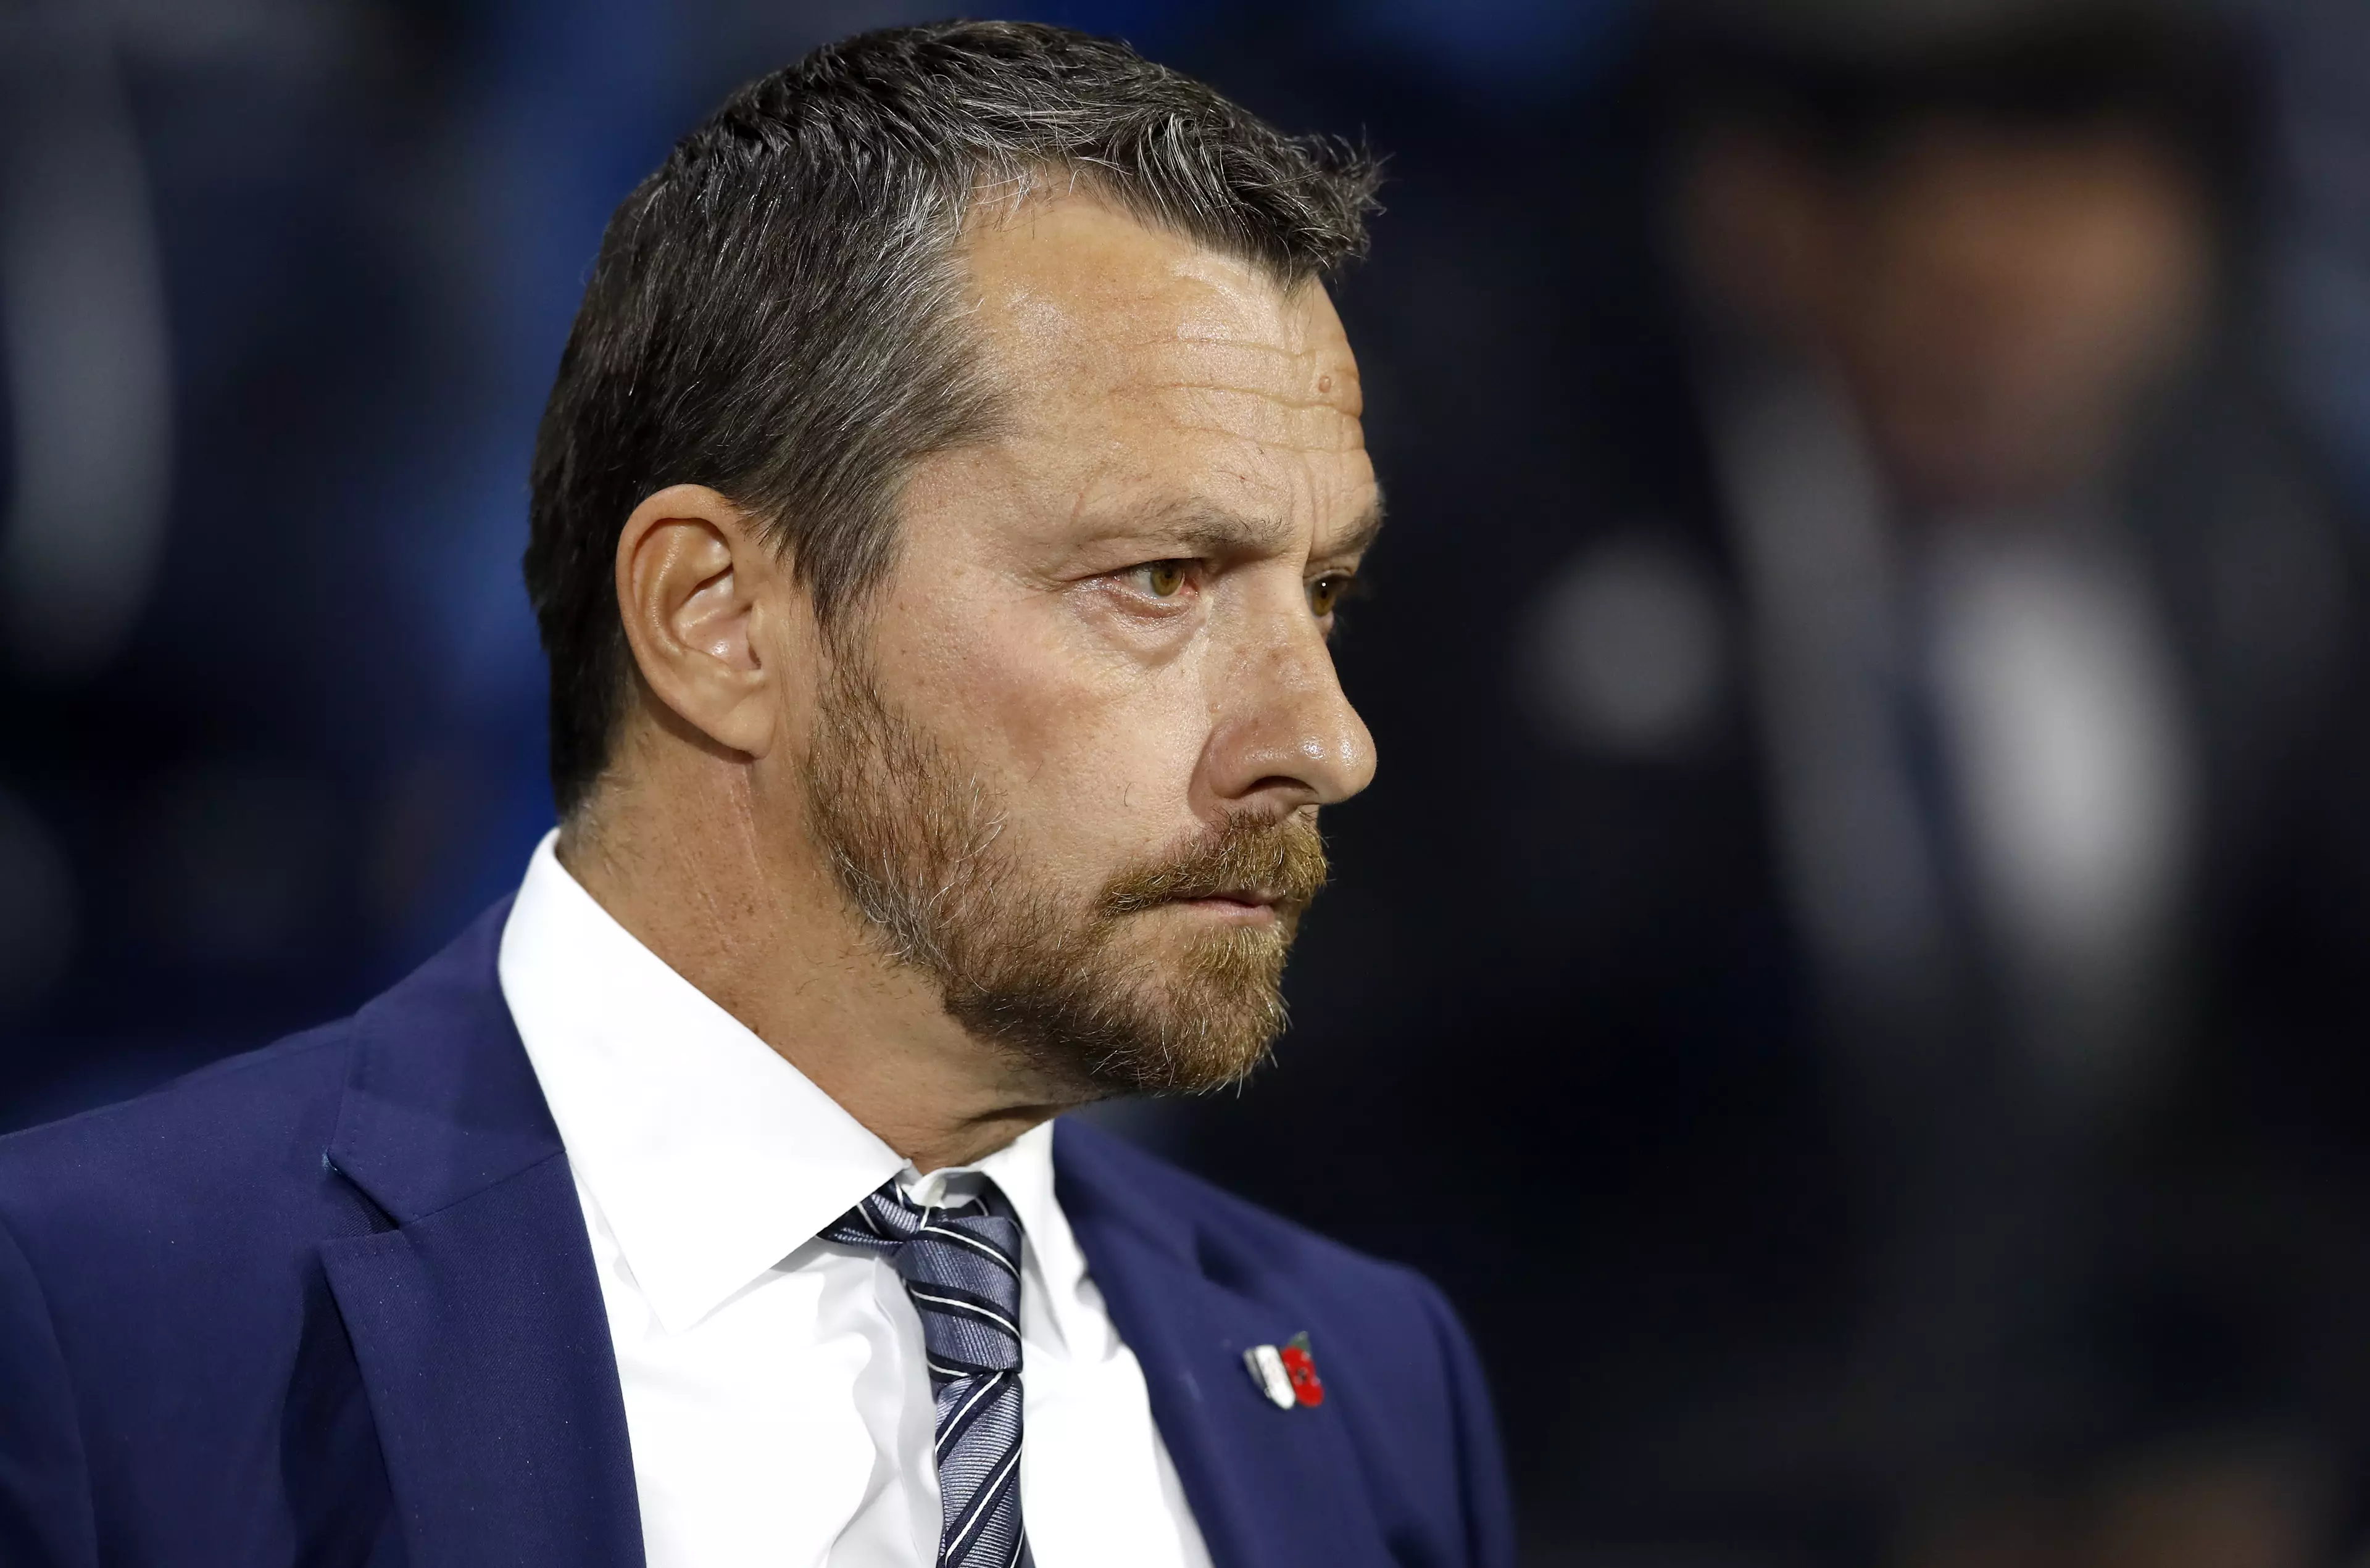 Things had been going dreadfully for Jokanovic. Image: PA Images